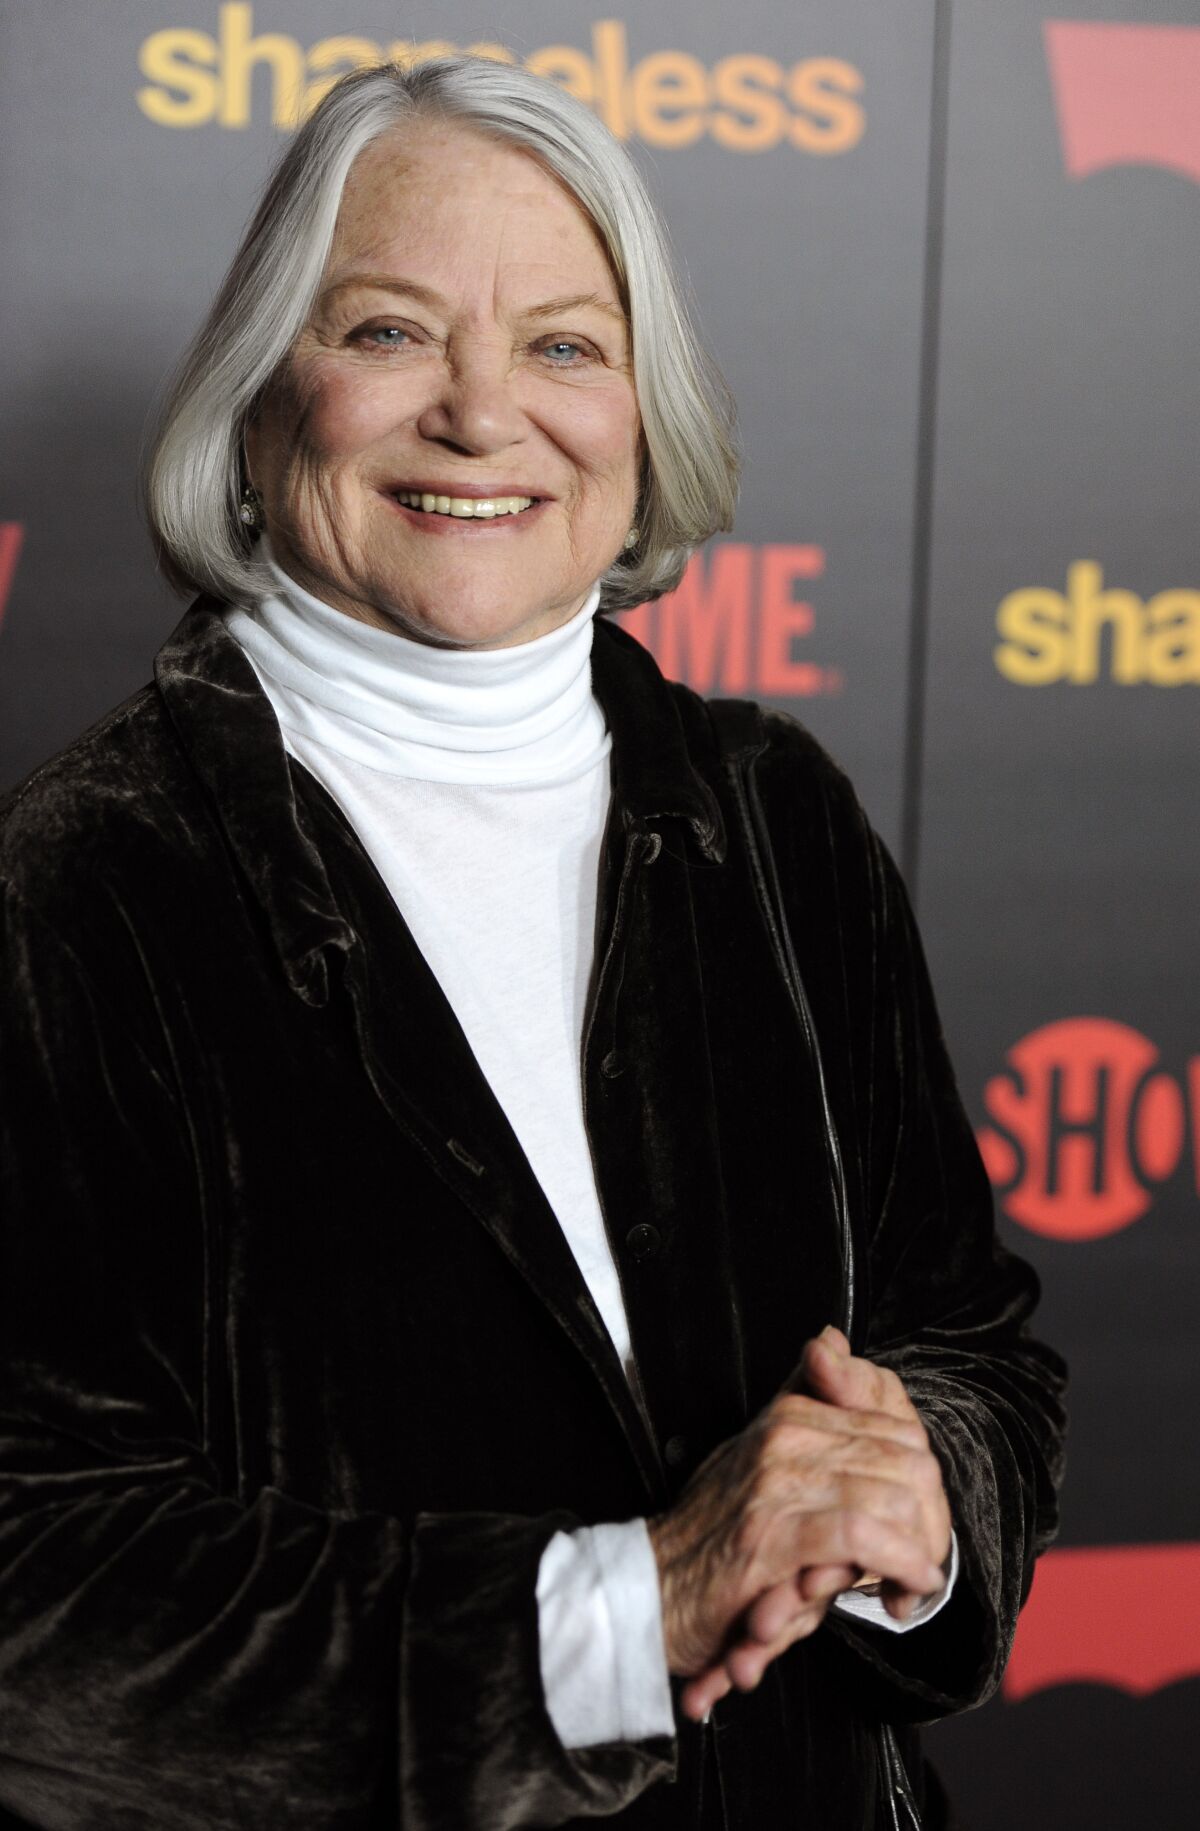 A woman in a gray bob, white turtleneck and black jacket is smiling